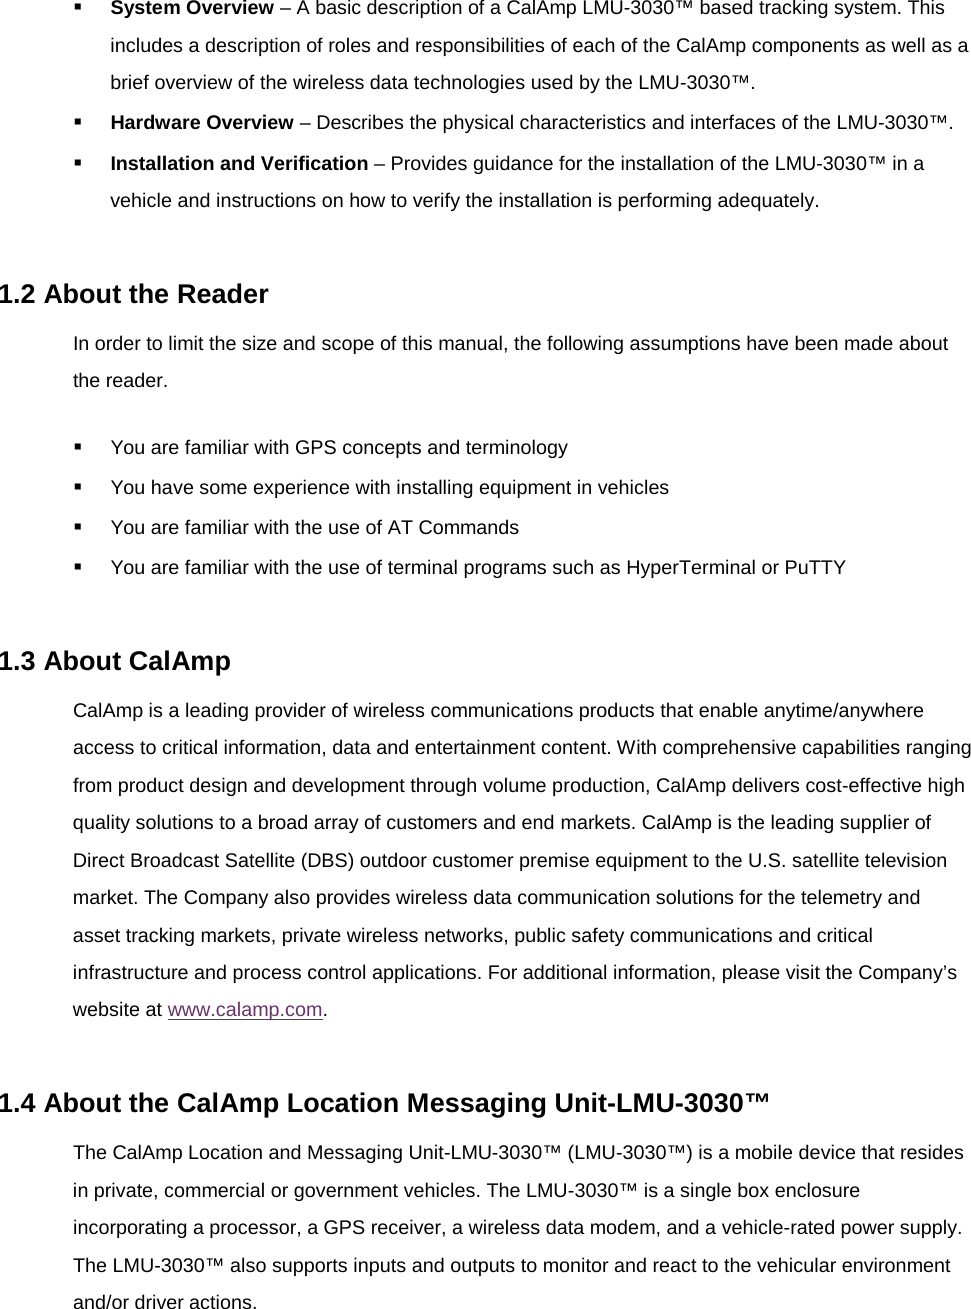  System Overview – A basic description of a CalAmp LMU-3030™ based tracking system. This includes a description of roles and responsibilities of each of the CalAmp components as well as a brief overview of the wireless data technologies used by the LMU-3030™.  Hardware Overview – Describes the physical characteristics and interfaces of the LMU-3030™.  Installation and Verification – Provides guidance for the installation of the LMU-3030™ in a vehicle and instructions on how to verify the installation is performing adequately.  1.2 About the Reader In order to limit the size and scope of this manual, the following assumptions have been made about the reader.  You are familiar with GPS concepts and terminology  You have some experience with installing equipment in vehicles  You are familiar with the use of AT Commands  You are familiar with the use of terminal programs such as HyperTerminal or PuTTY  1.3 About CalAmp CalAmp is a leading provider of wireless communications products that enable anytime/anywhere access to critical information, data and entertainment content. With comprehensive capabilities ranging from product design and development through volume production, CalAmp delivers cost-effective high quality solutions to a broad array of customers and end markets. CalAmp is the leading supplier of Direct Broadcast Satellite (DBS) outdoor customer premise equipment to the U.S. satellite television market. The Company also provides wireless data communication solutions for the telemetry and asset tracking markets, private wireless networks, public safety communications and critical infrastructure and process control applications. For additional information, please visit the Company’s website at www.calamp.com.  1.4 About the CalAmp Location Messaging Unit-LMU-3030™ The CalAmp Location and Messaging Unit-LMU-3030™ (LMU-3030™) is a mobile device that resides in private, commercial or government vehicles. The LMU-3030™ is a single box enclosure incorporating a processor, a GPS receiver, a wireless data modem, and a vehicle-rated power supply. The LMU-3030™ also supports inputs and outputs to monitor and react to the vehicular environment and/or driver actions. 